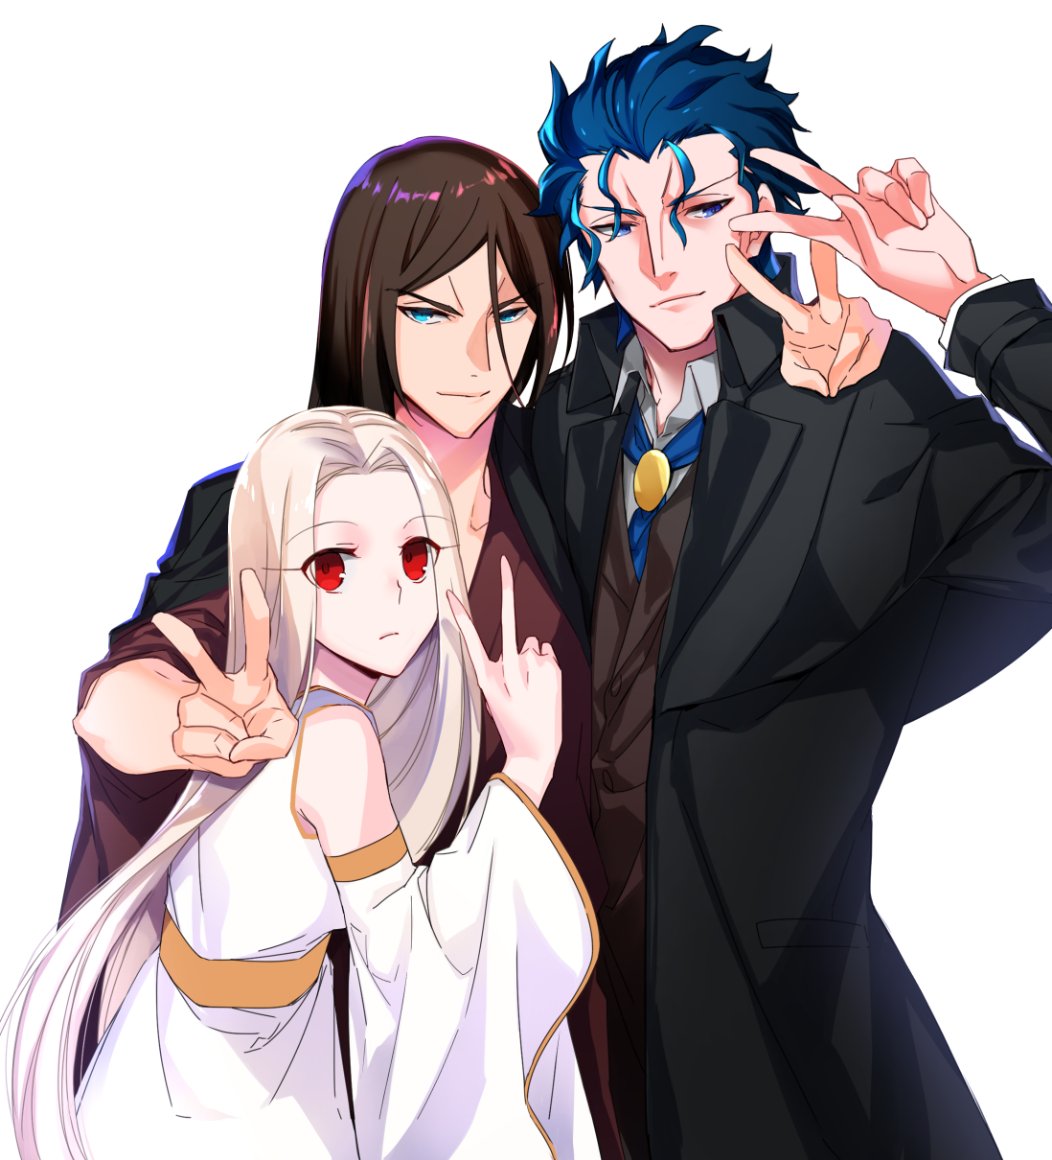 1girl 2boys black_hair black_jacket blue_eyes blue_hair closed_mouth commentary_request double_v dress eyebrows_visible_through_hair fate/grand_order fate/stay_night fate_(series) homunculus jacket japanese_clothes justeaze_lizrich_von_einzbern long_hair looking_at_viewer matou_zouken multiple_boys red_eyes simple_background toosaka_nagato v white_background white_dress white_hair ycco_(estrella)